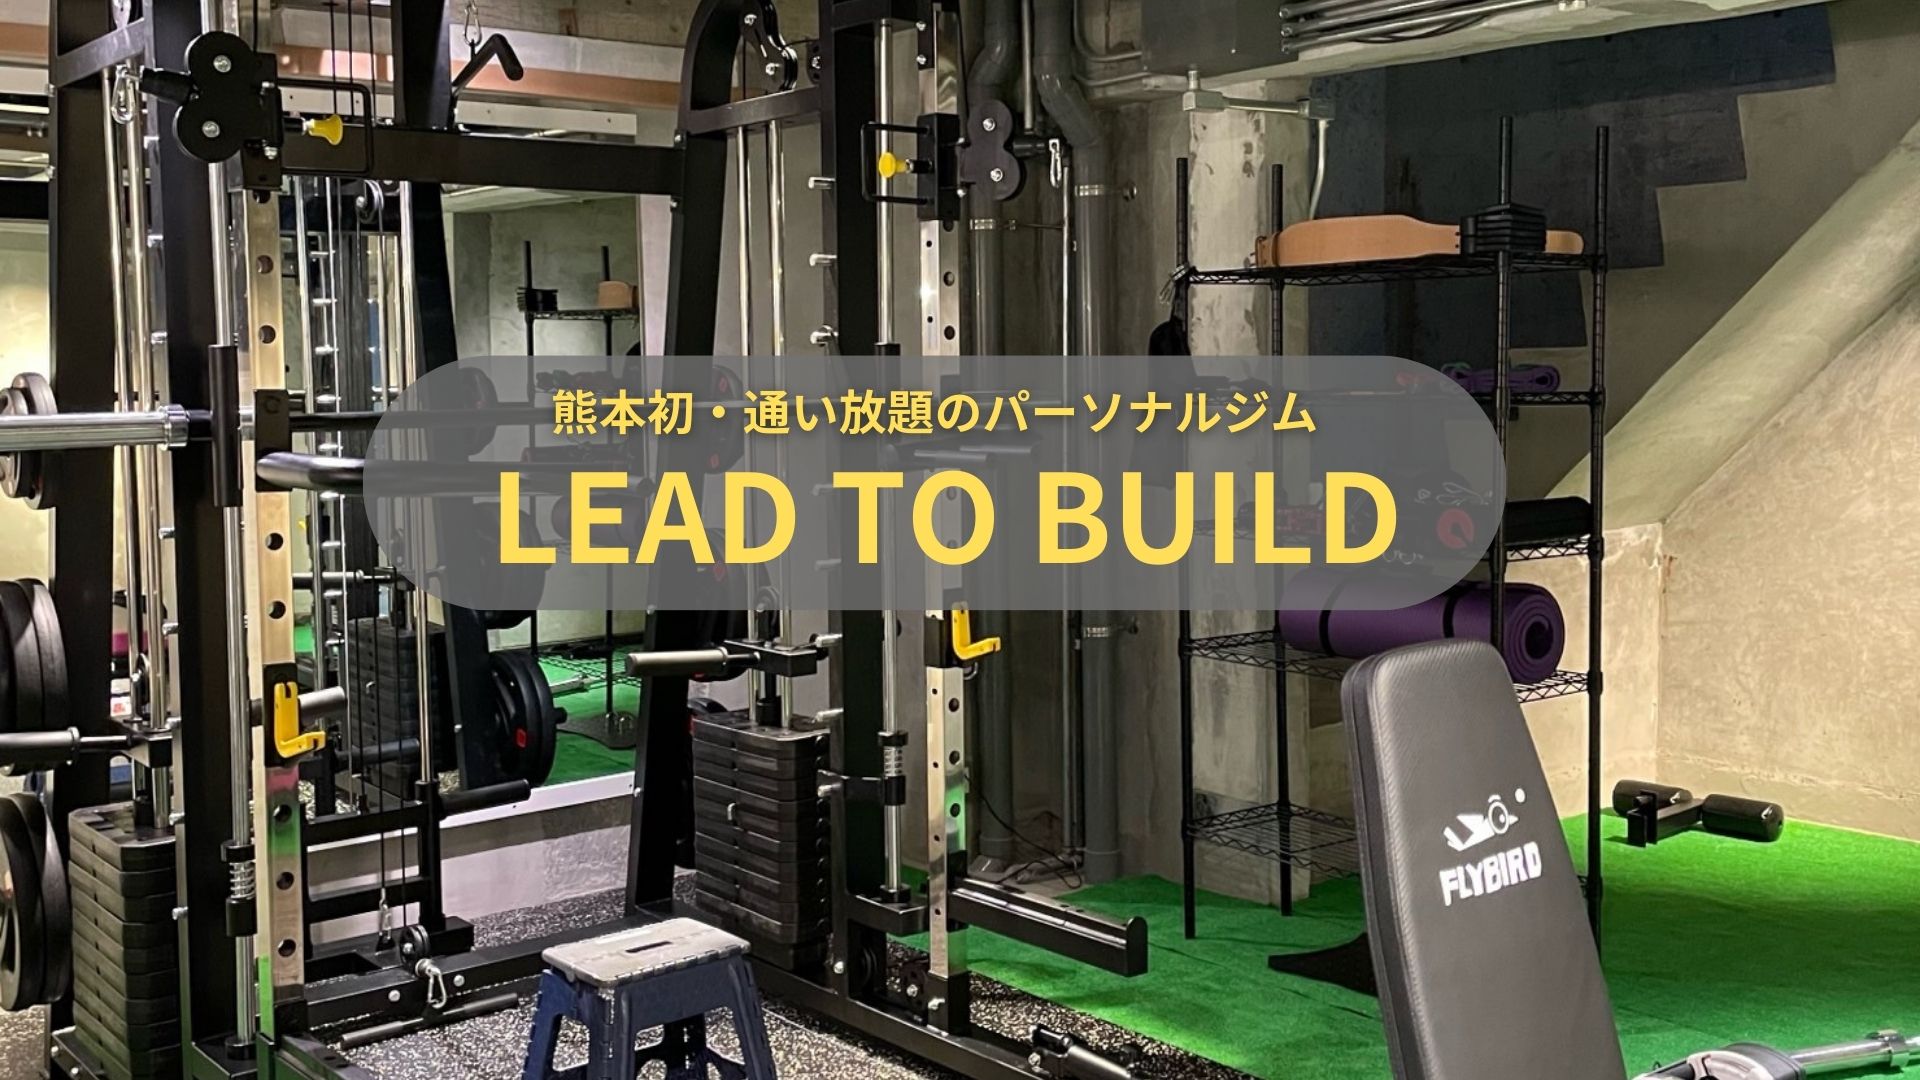 LEAD TO BUILD